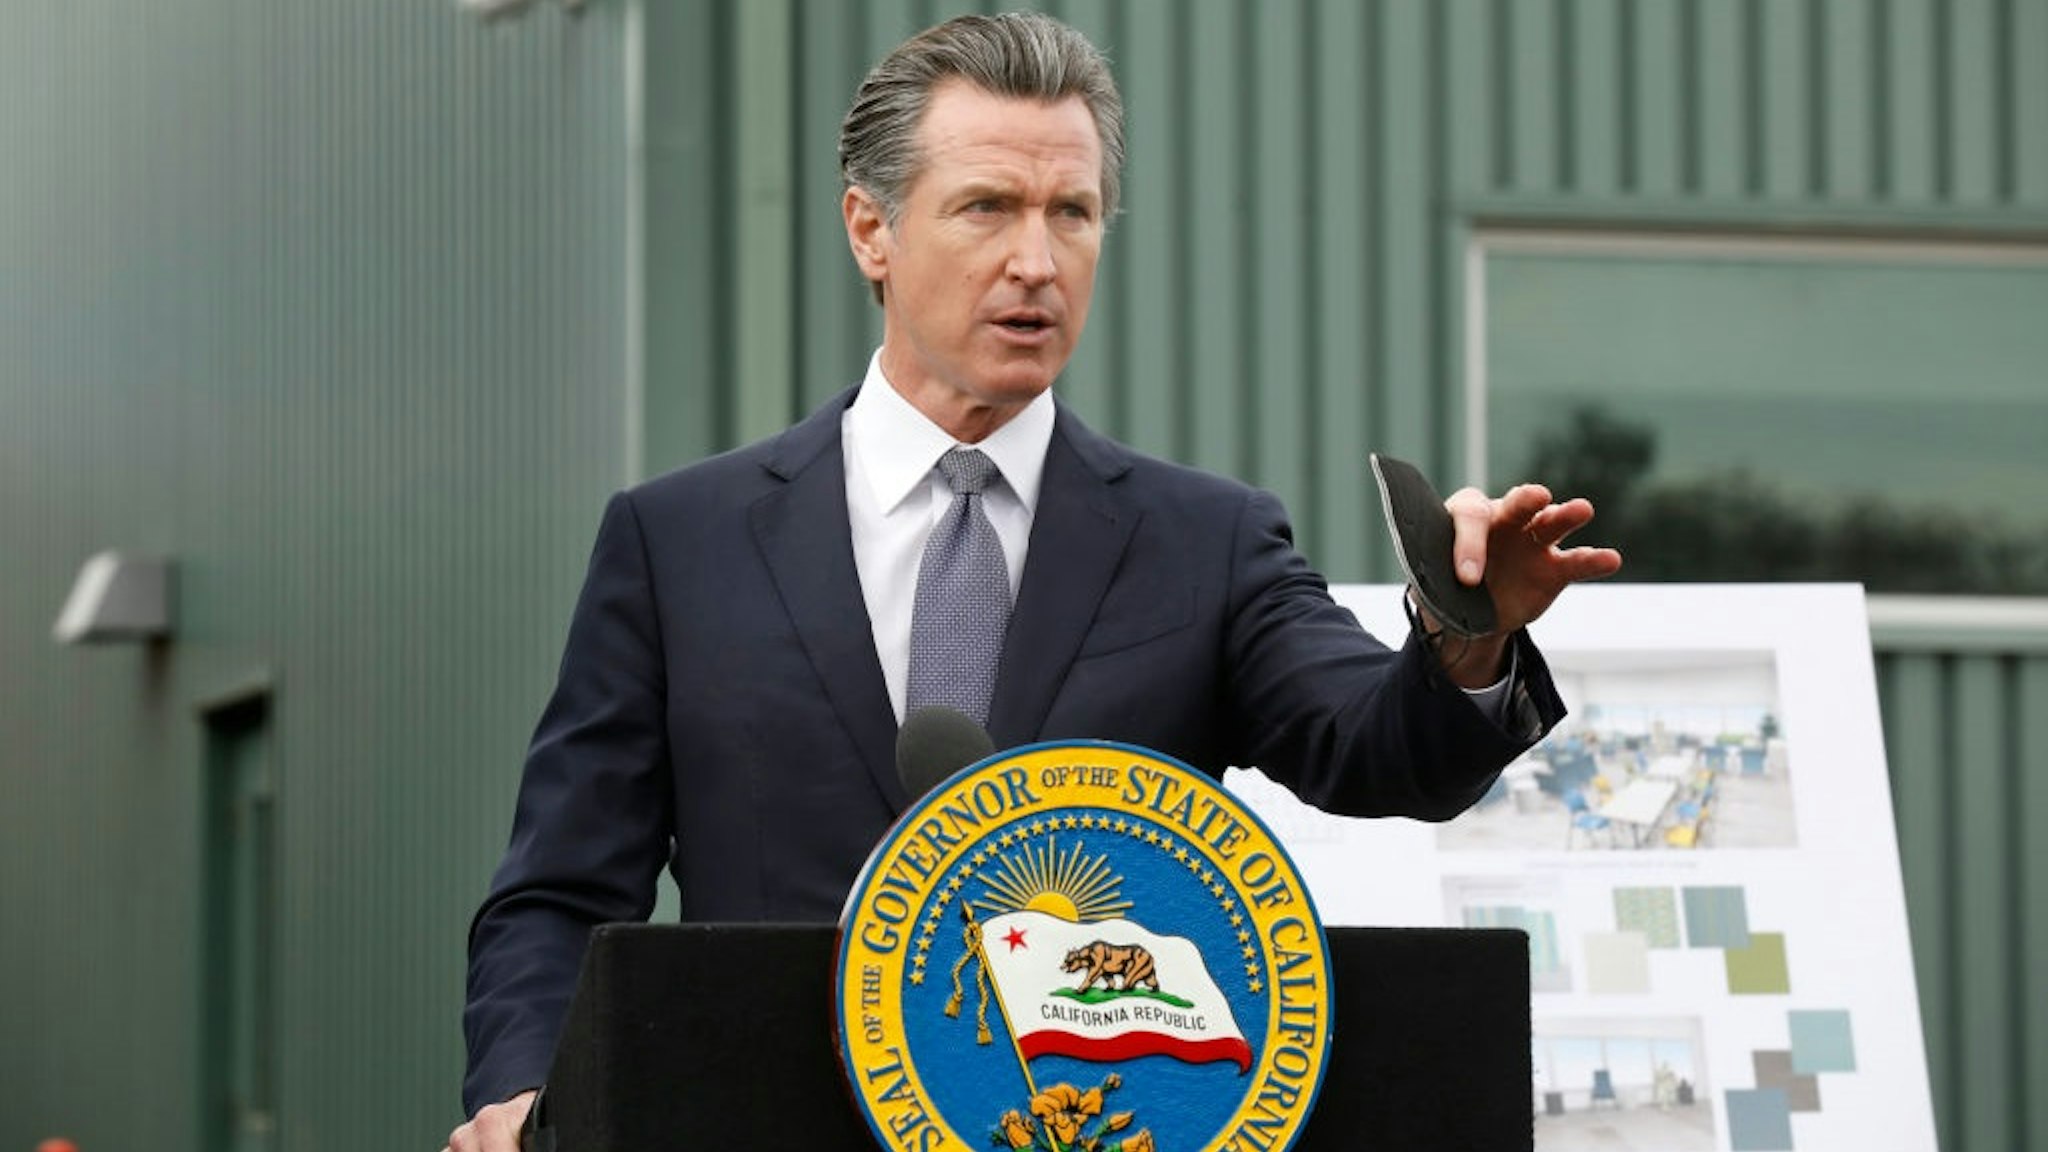 On Jan, 31, 2022, California Governor Gavin Newsom holds a press conference after taking a tour of the site of a behavioral health and transitional housing facility in Los Angeles County, at 1326 W Imperial Hwy., to highlight the states major new investments to house and provide critical support services to the most vulnerable Californians.